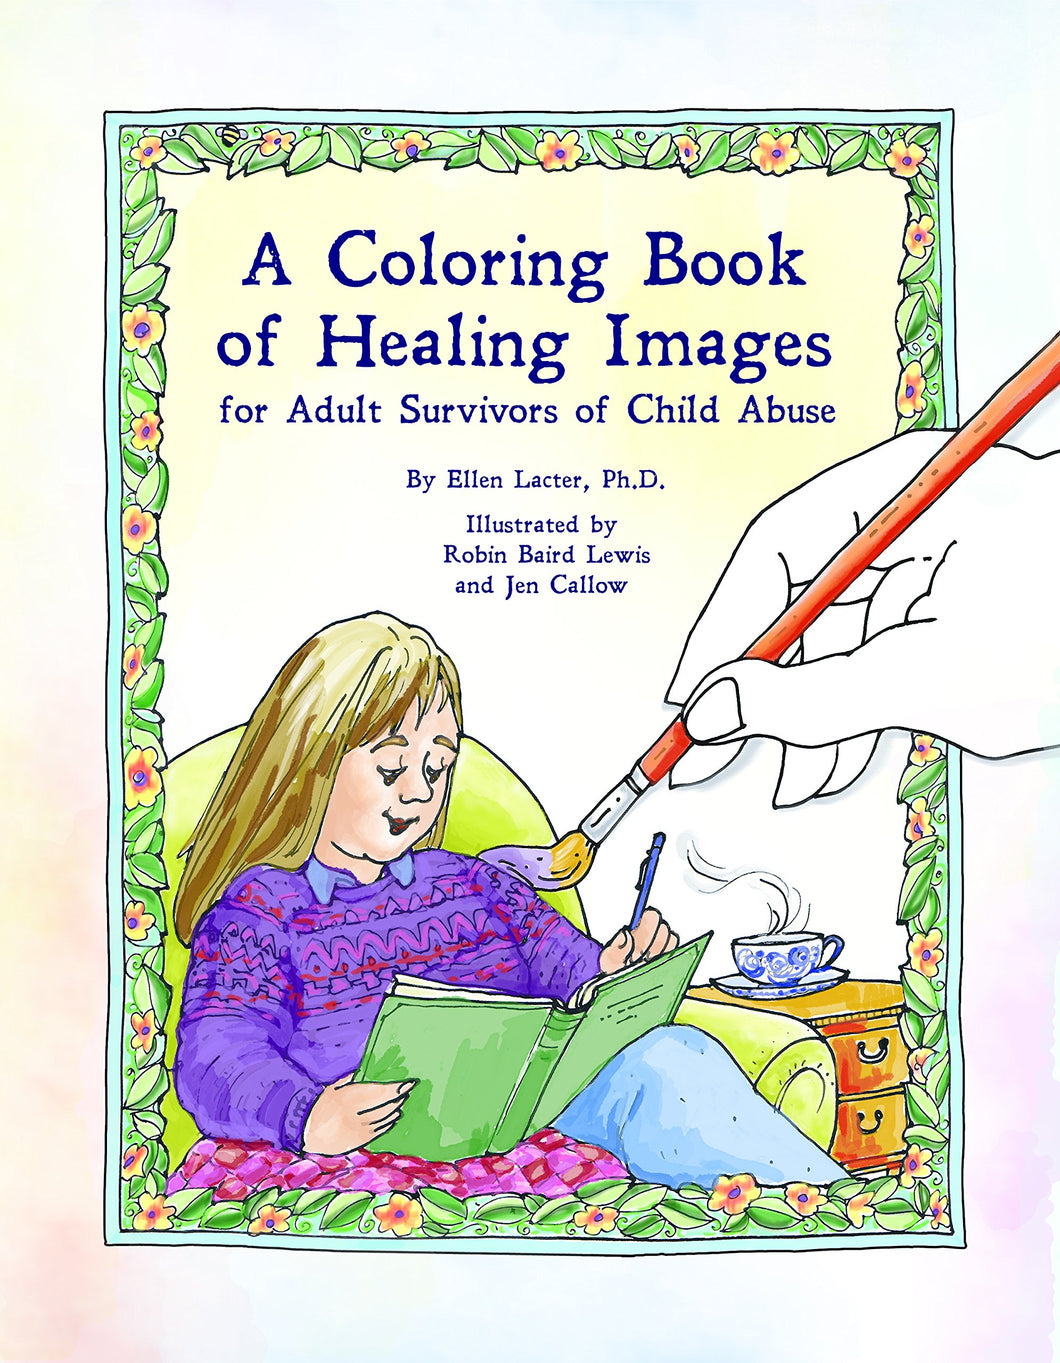 A Coloring Book of Healing Images